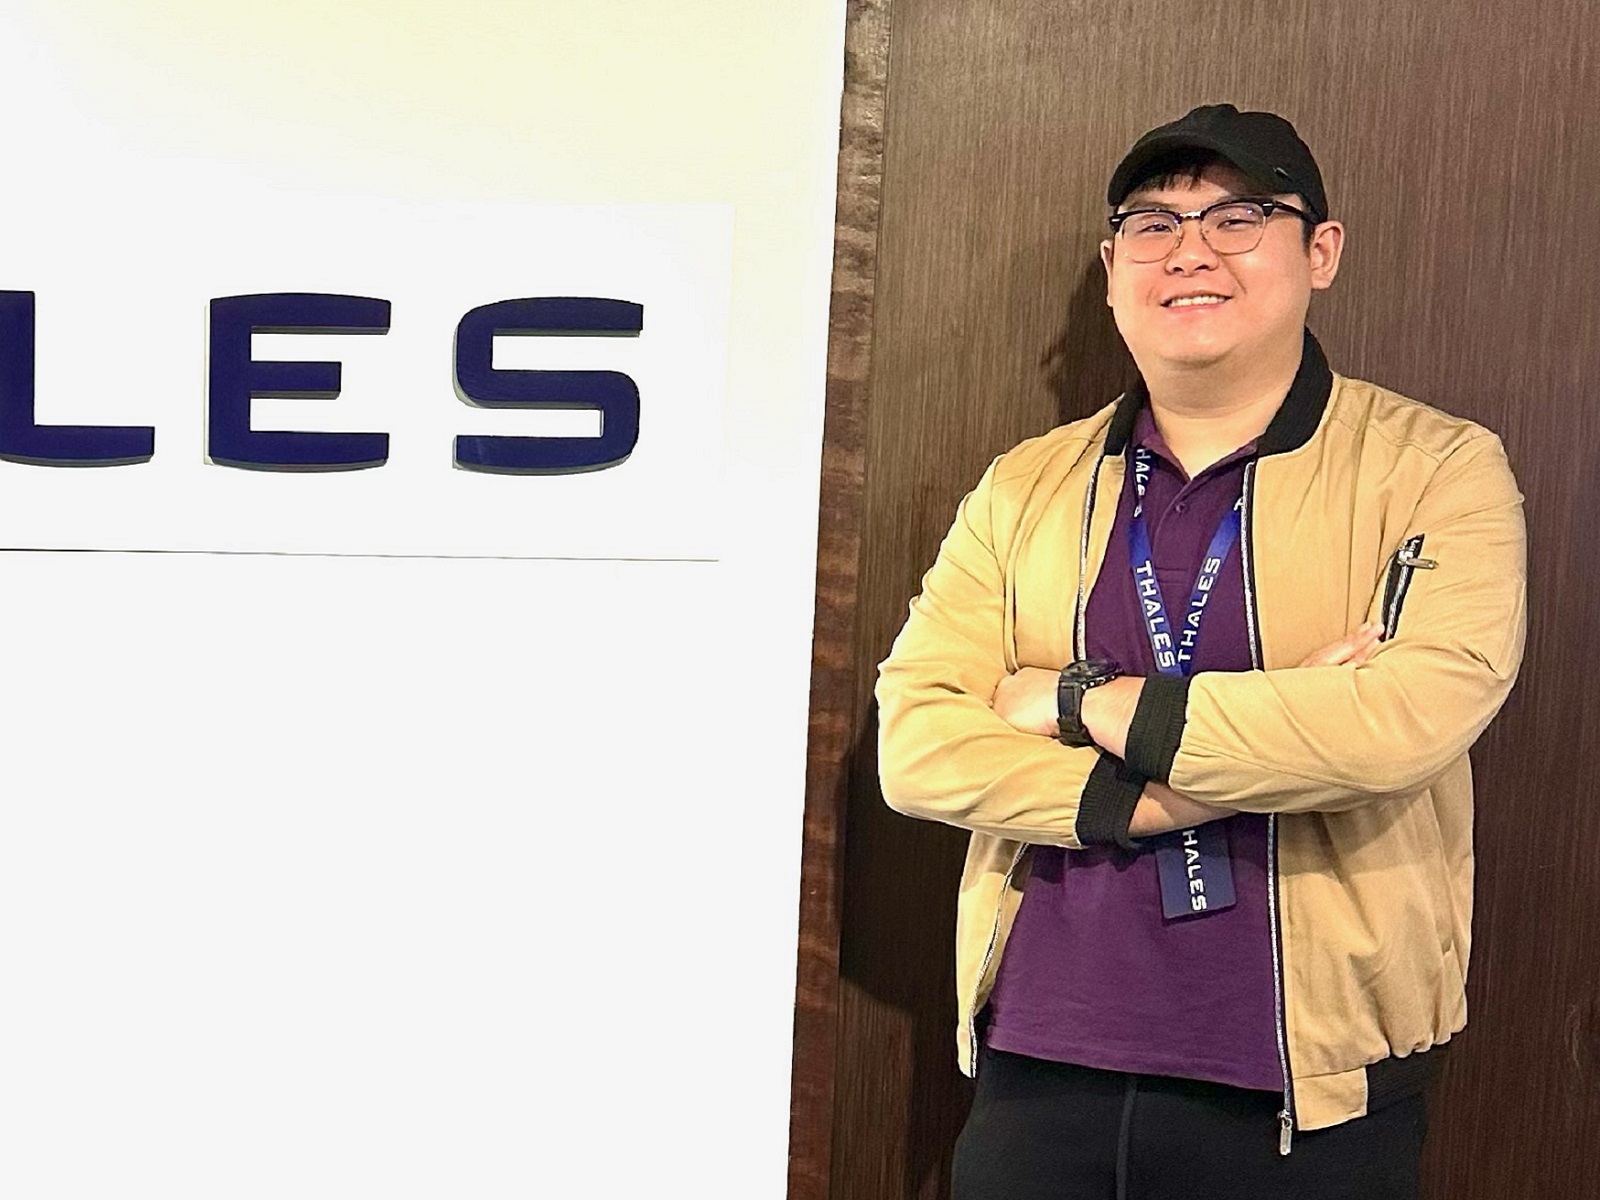 DigiPen graduate Marcus Lee stands in front of the Thales logo